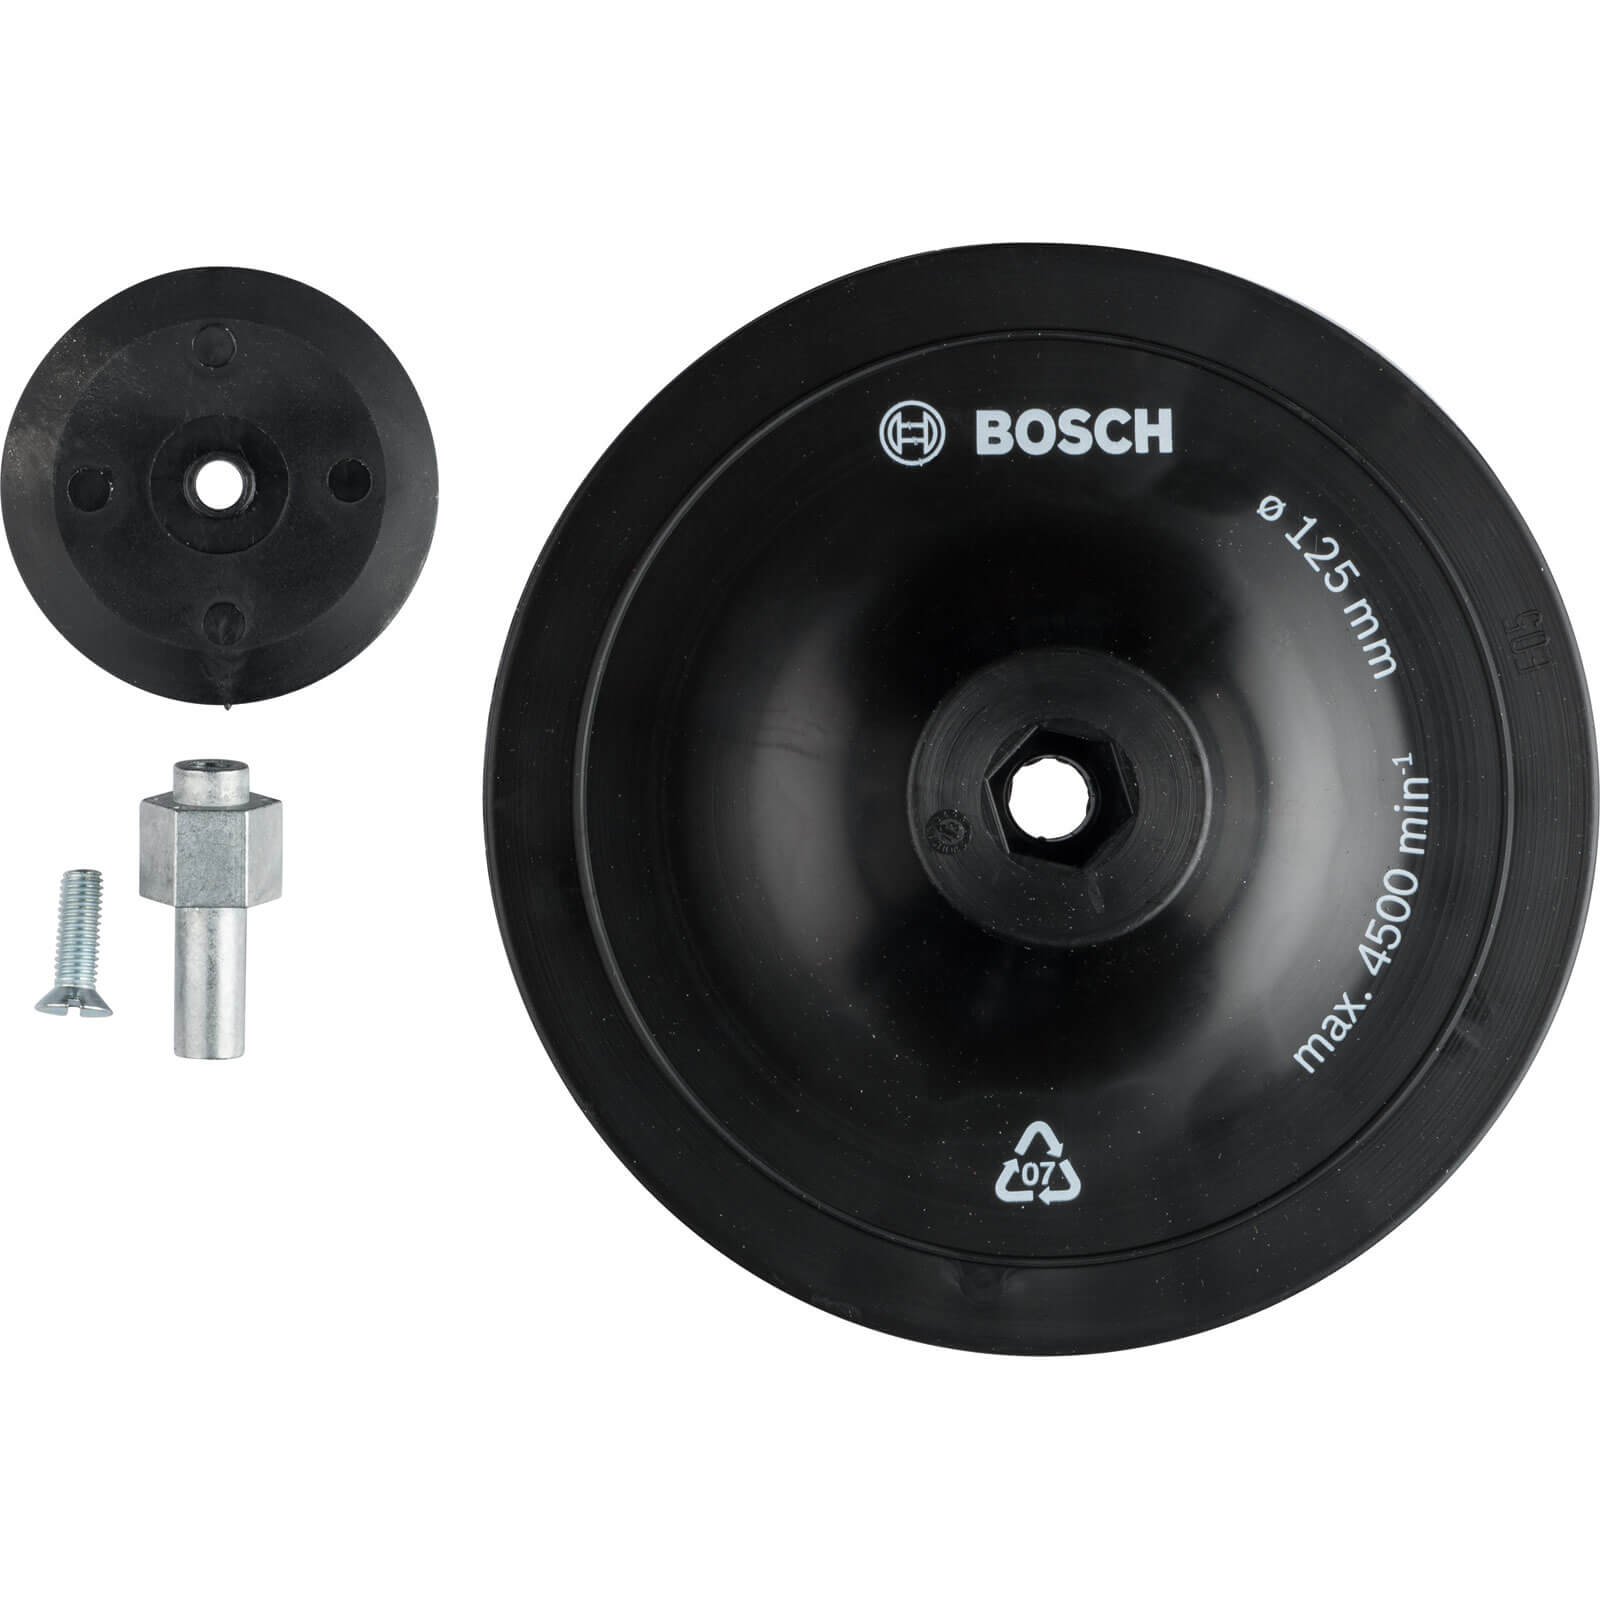 Image of Bosch Backing Pad and Shank for Drills 125mm